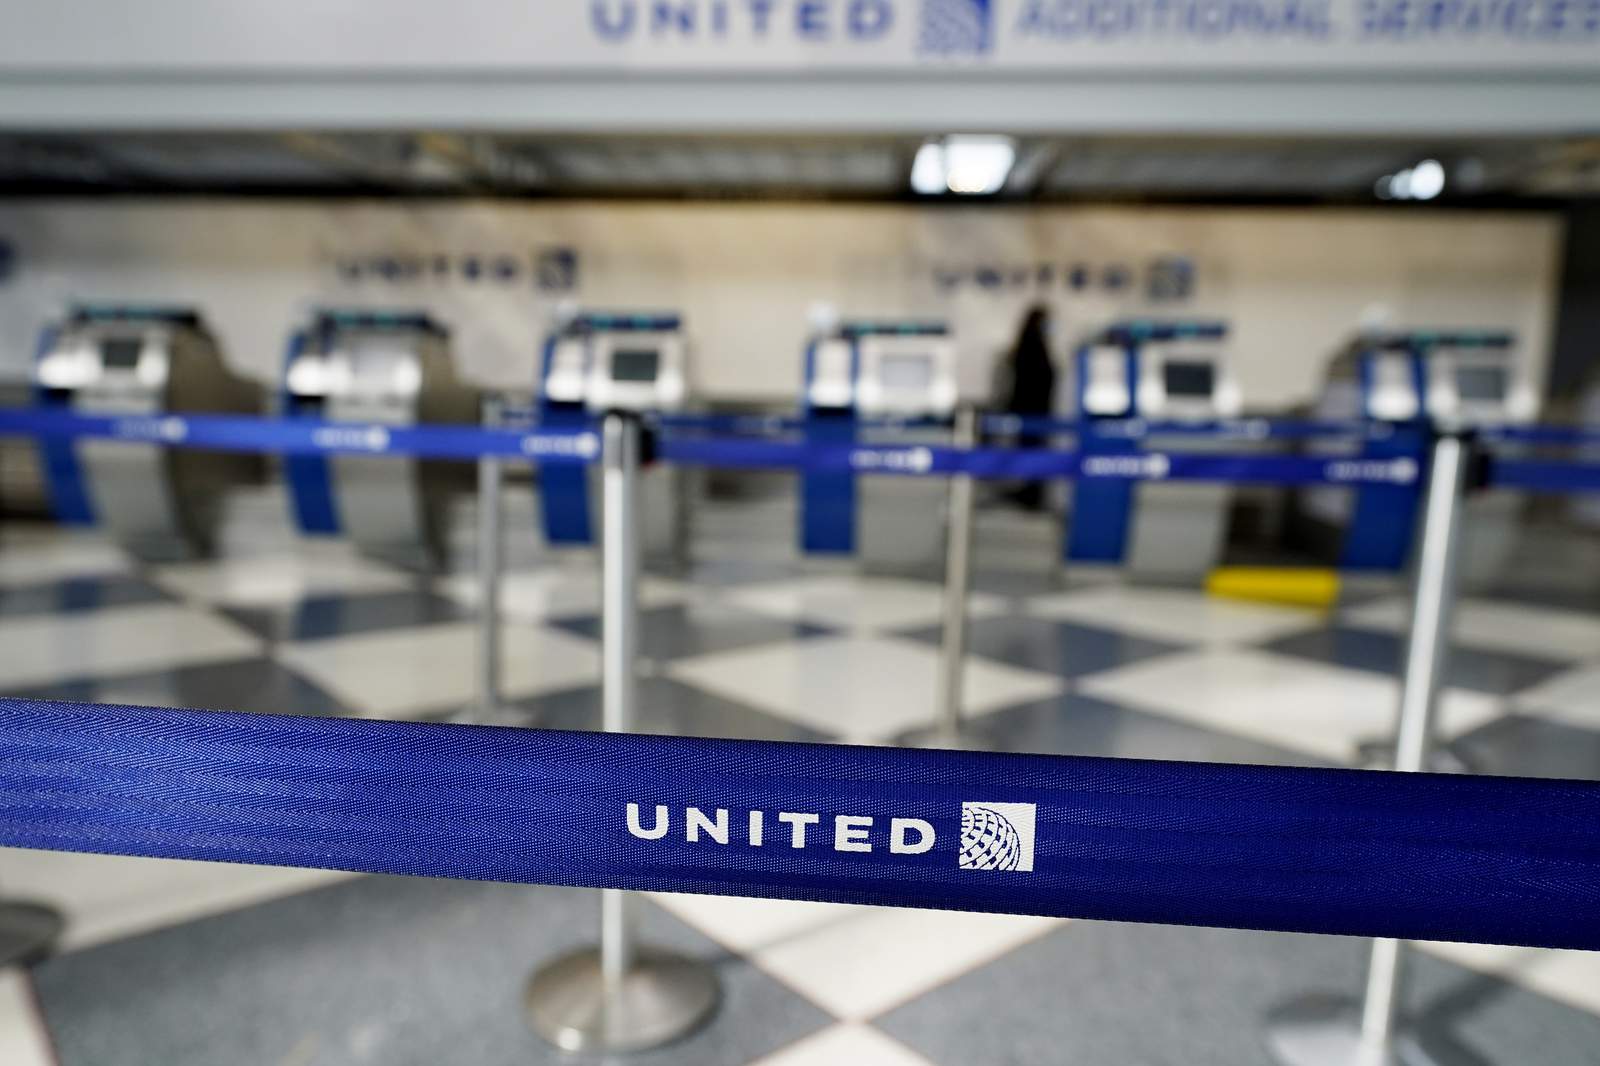 United loses $1.8 billion, aims to shift focus to recovery